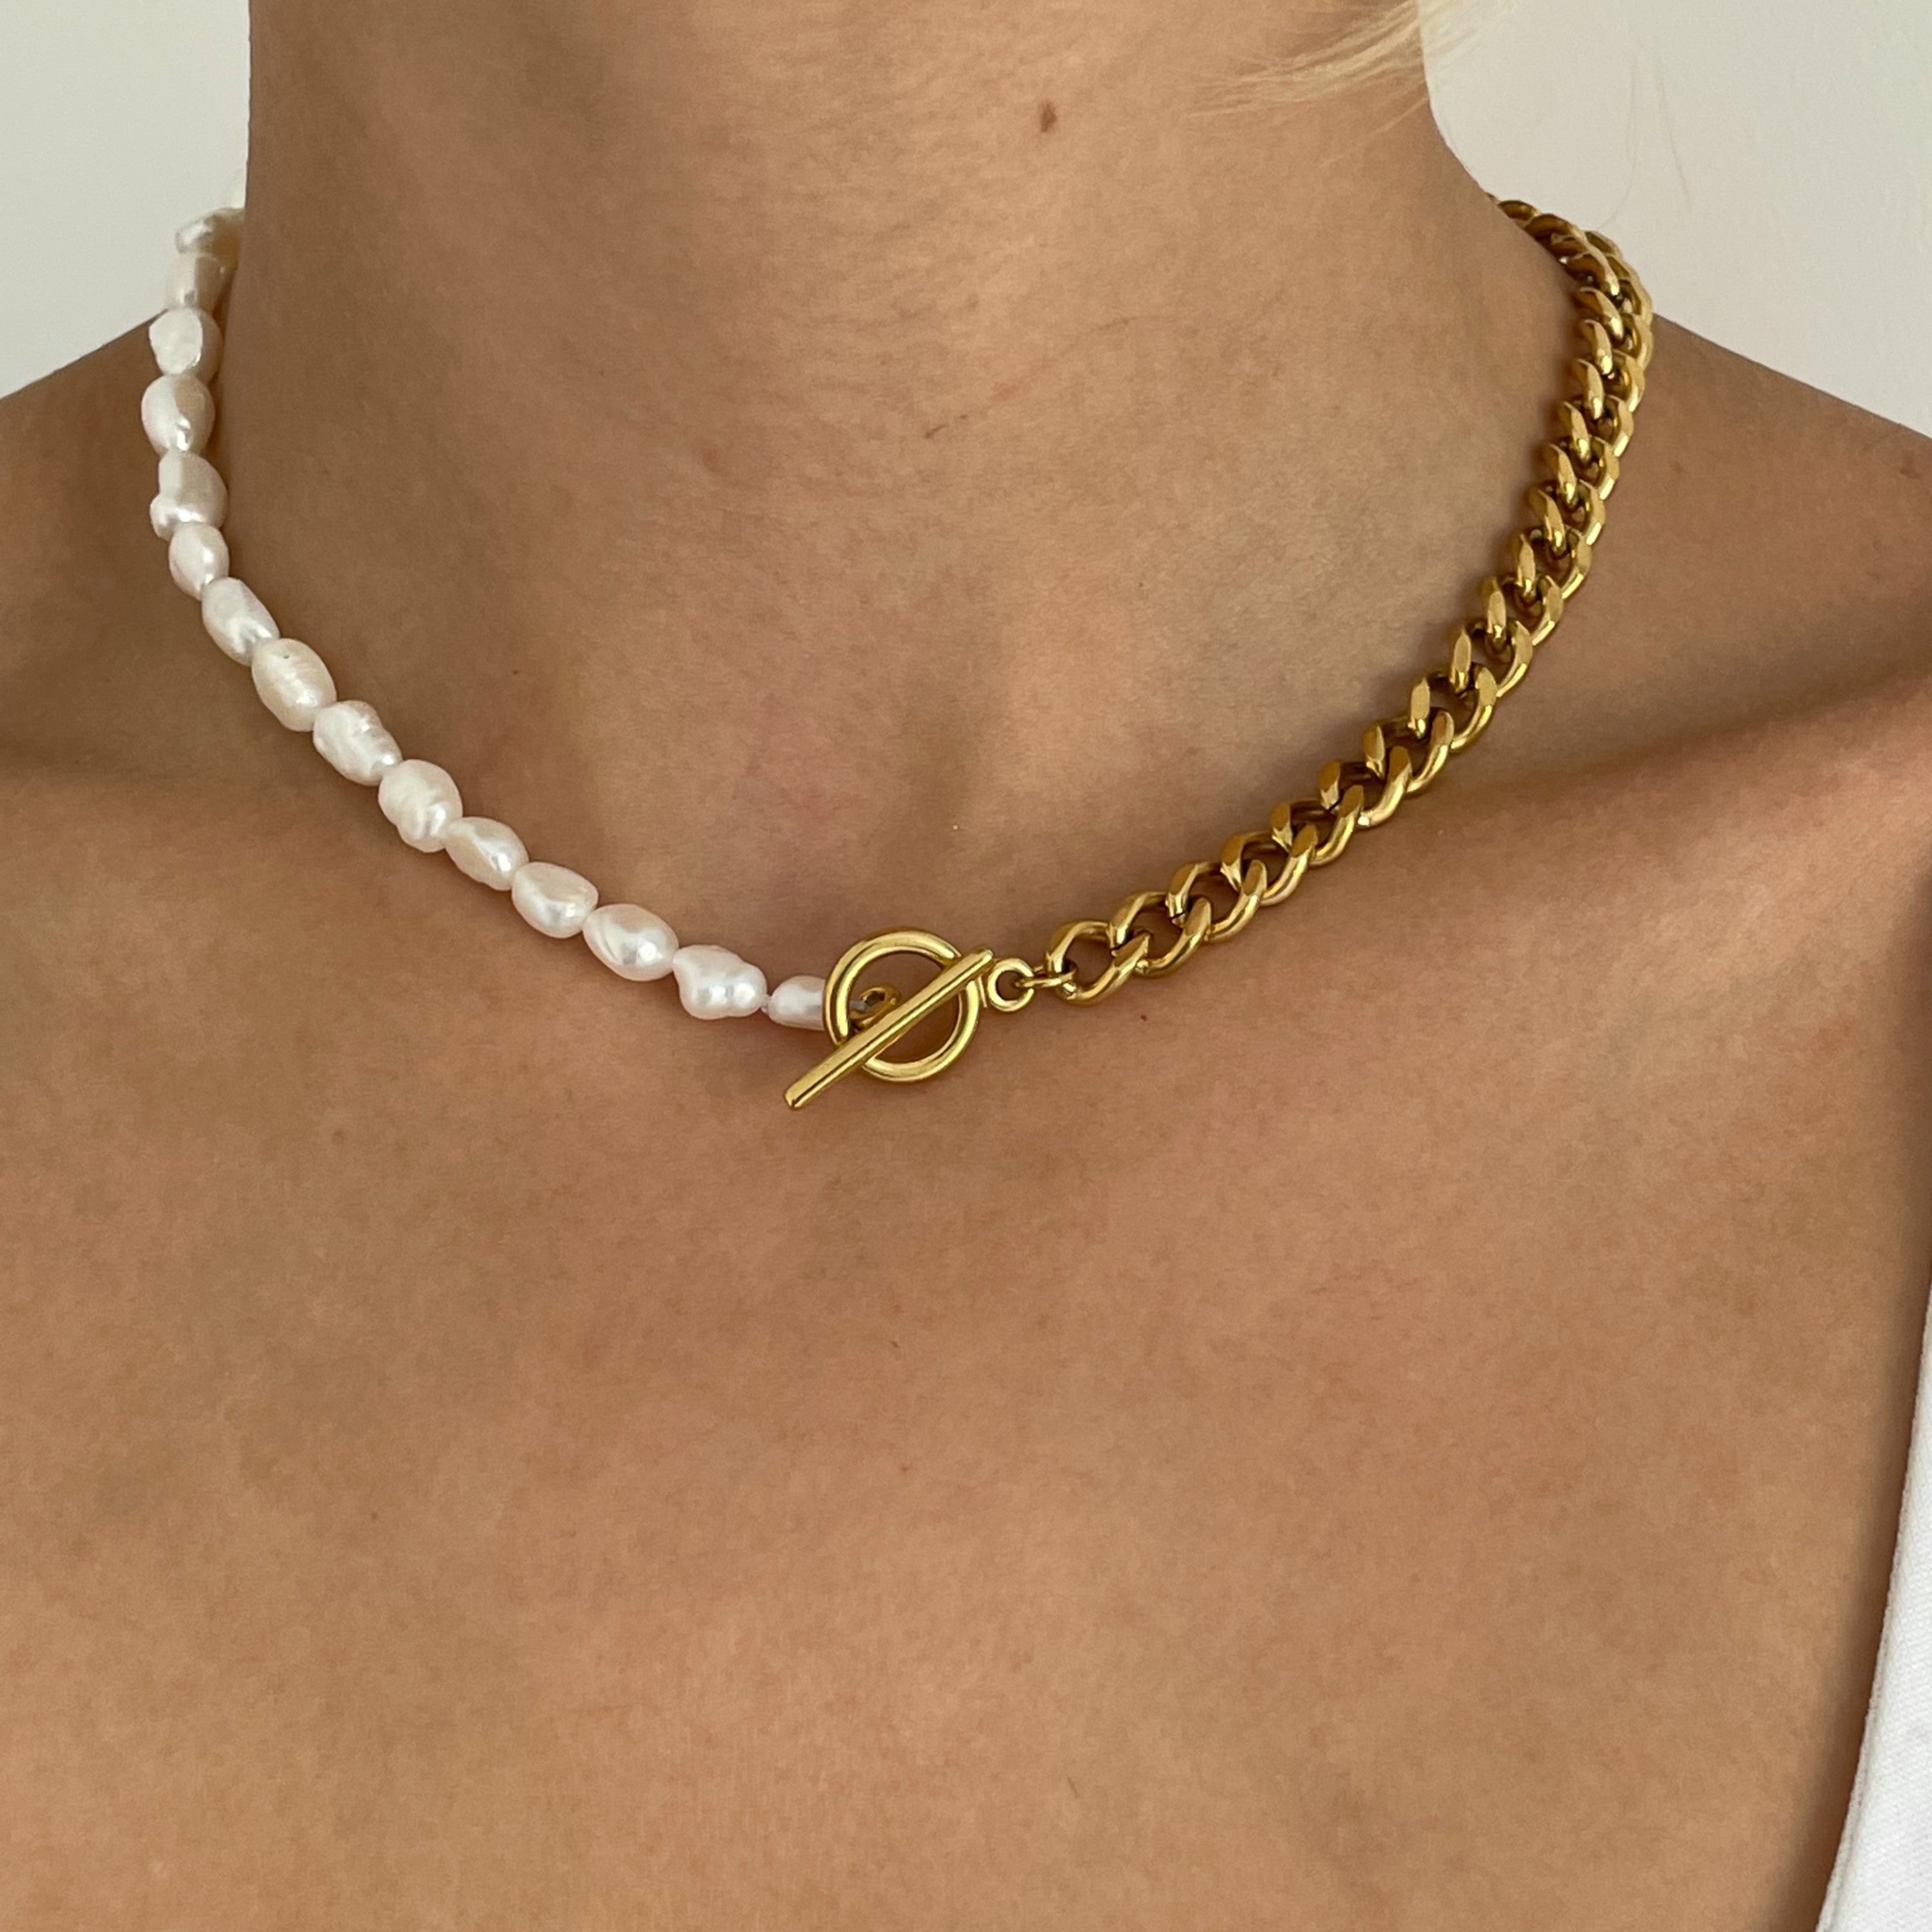 Statement Gold Pearl Necklace: Elevate your style with this exquisite blend of gold and pearls